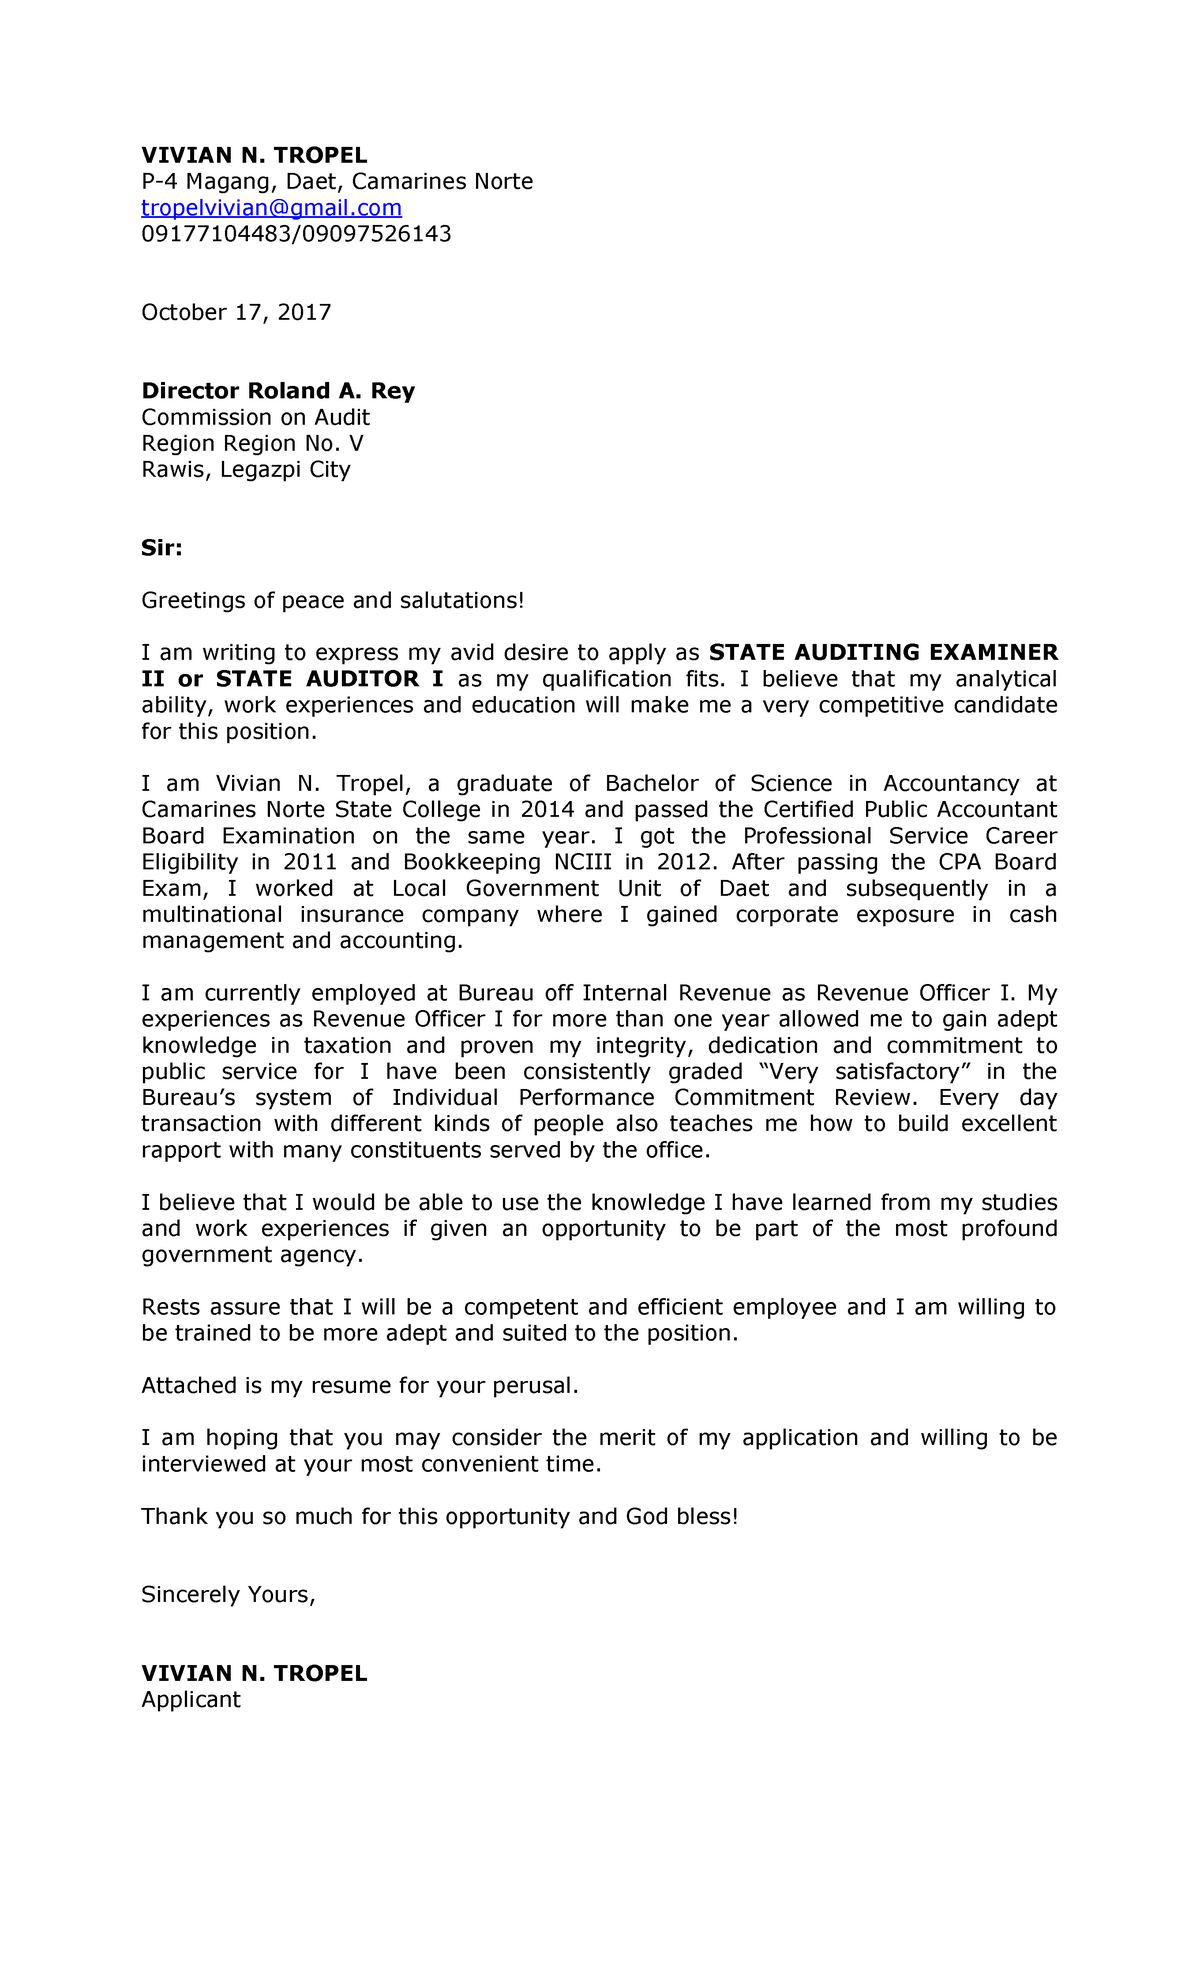 sample application letter for employment in the philippines government